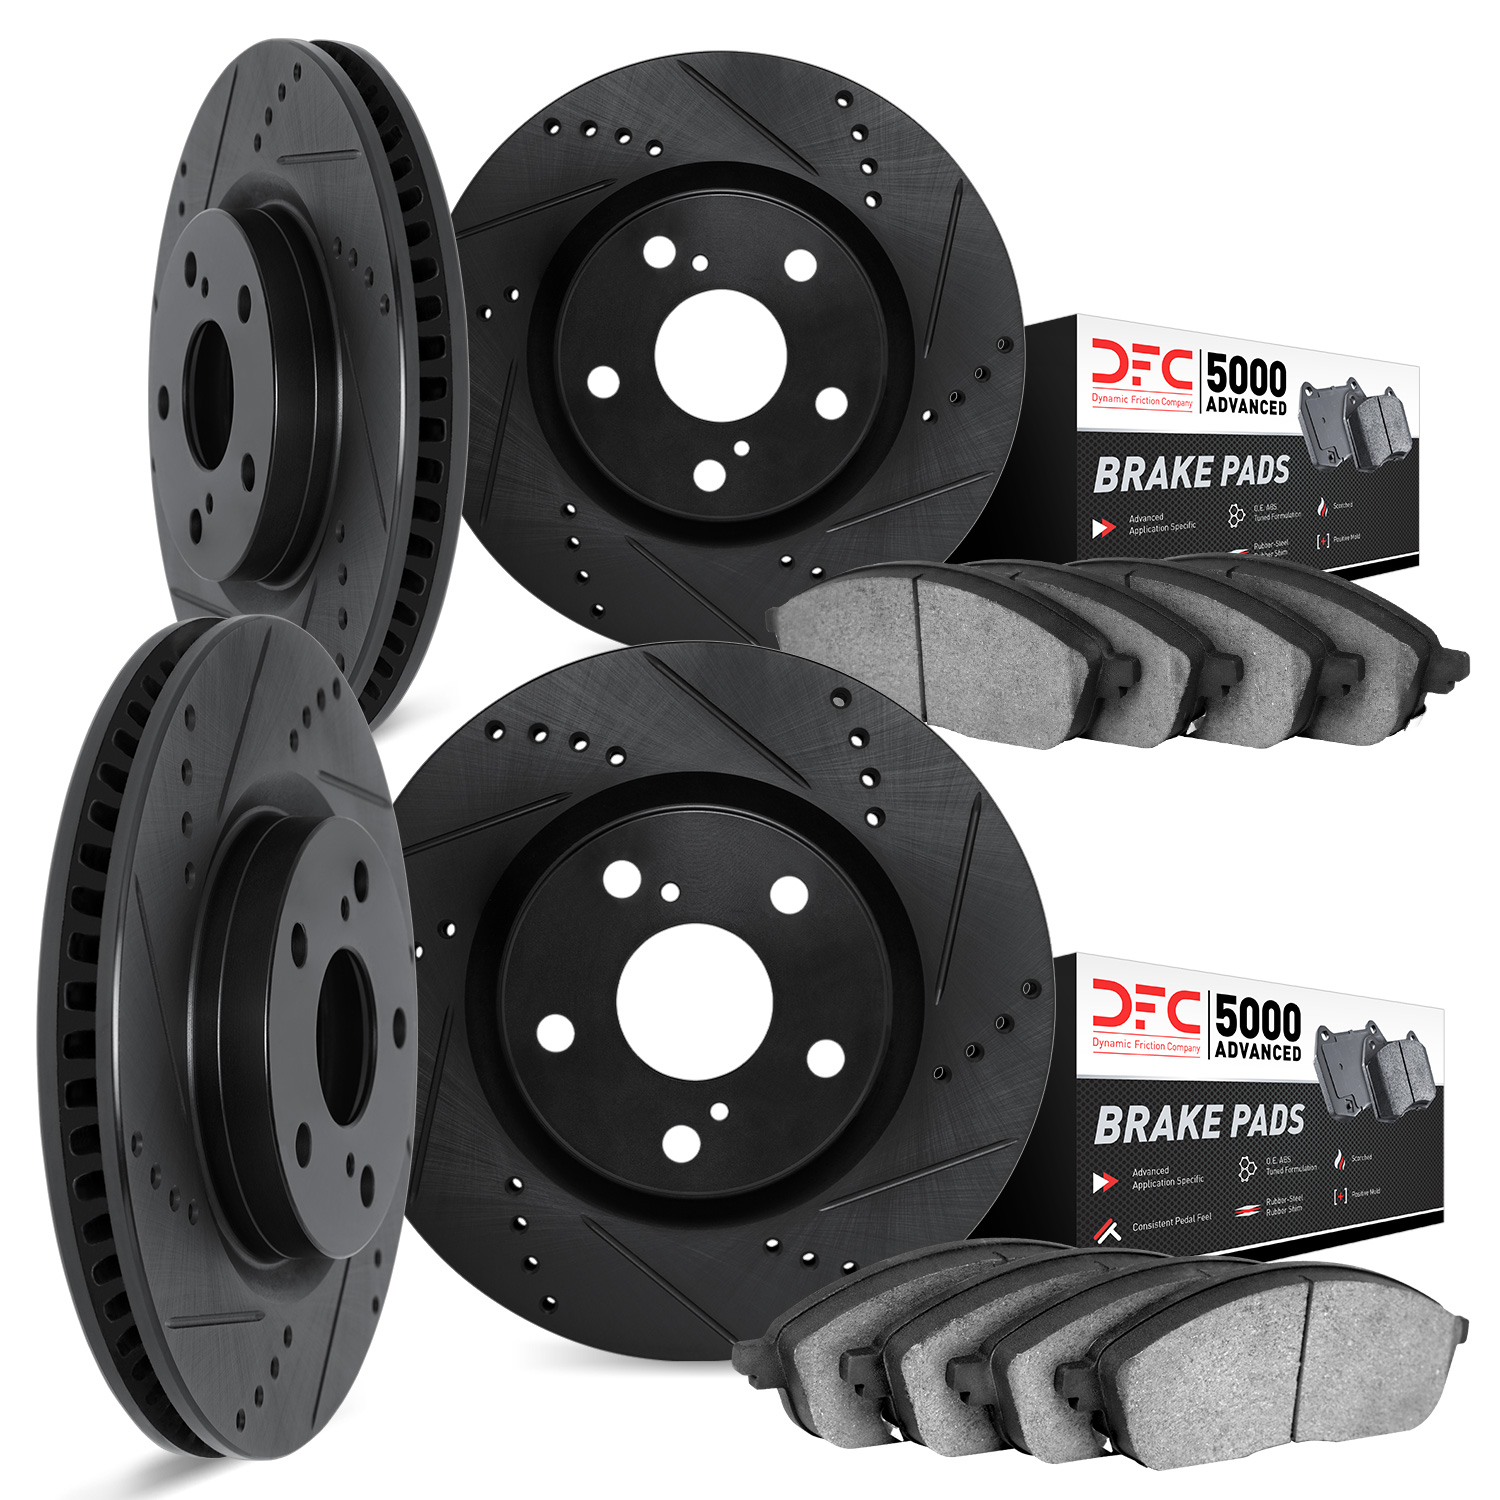 8504-31039 Drilled/Slotted Brake Rotors w/5000 Advanced Brake Pads Kit [Black], 2009-2010 BMW, Position: Front and Rear